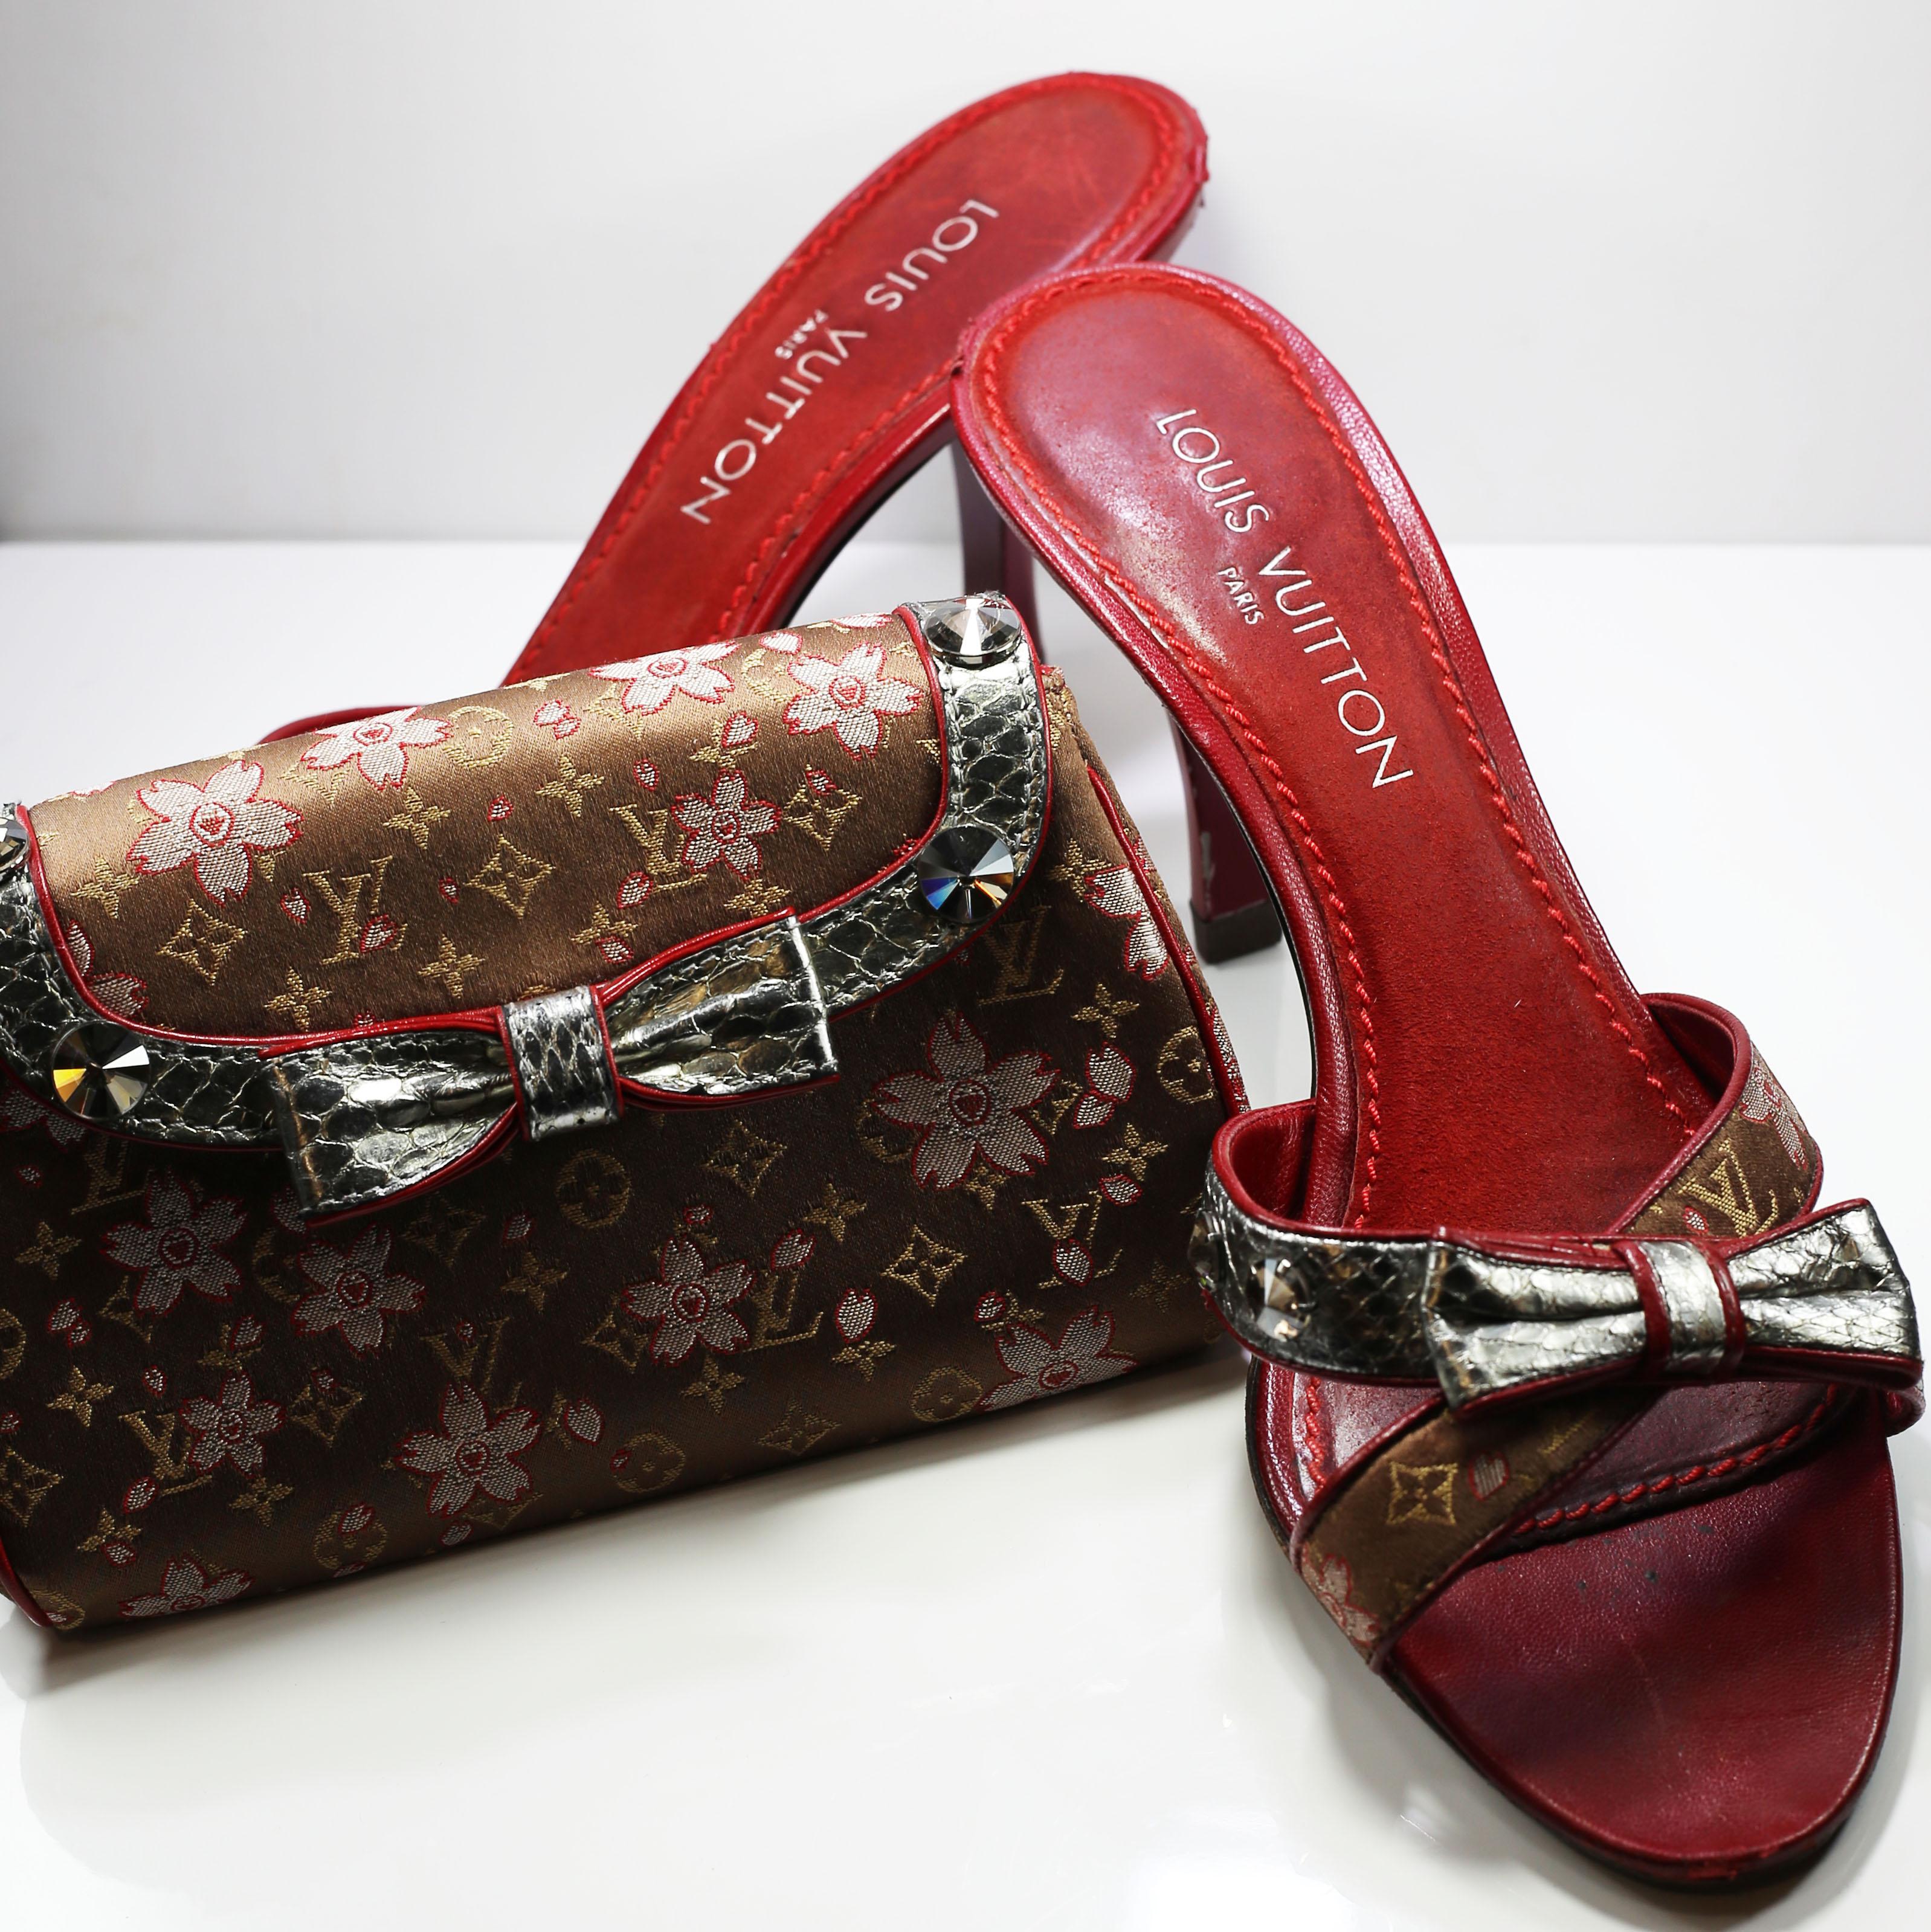 Louis Vuitton Takashi Murakami Monogram Satin Cherry Blossom Open Toe Sandal 
Made In: France 
Color: Red Bourdeaux
Materials: Leather

Bag:
Belt strap lenght: 142cm / 55.90 inches
Width & Height purse 16x10 cm / 6,29x3,93
Sandals: 
Closure/Opening: